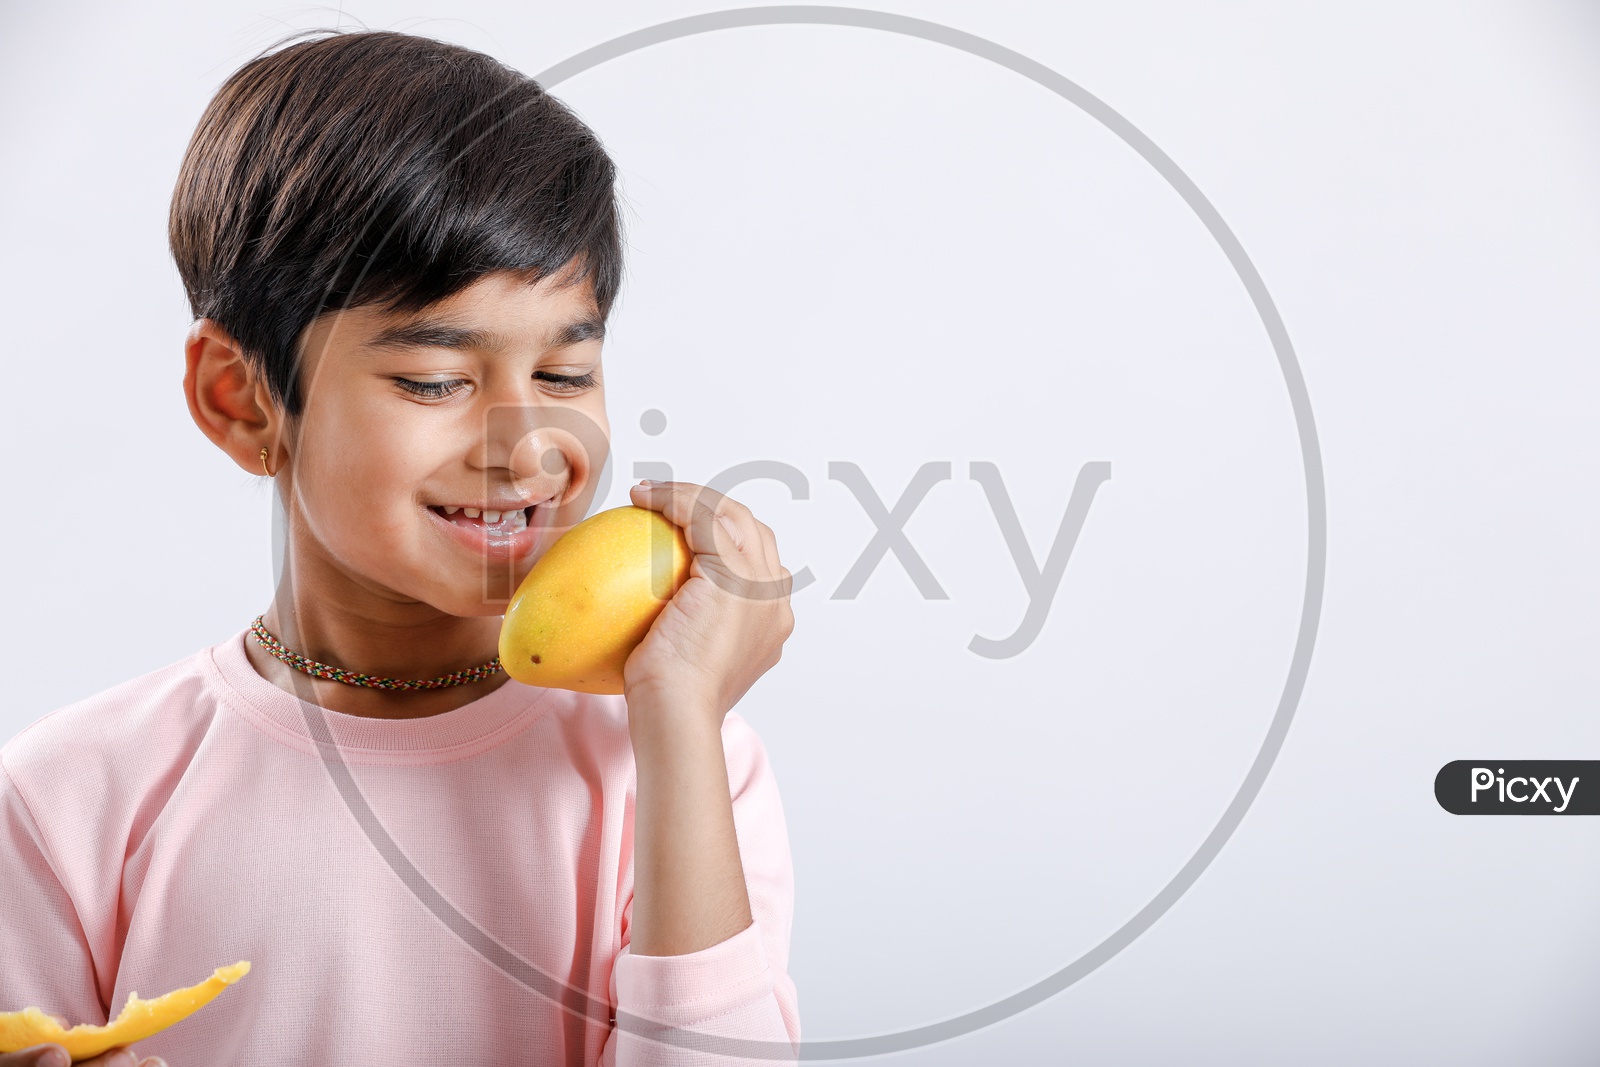 Indian Cute Boy  or  Asian Boy or kid Holding Mango With an Expression On an Isolated White Background